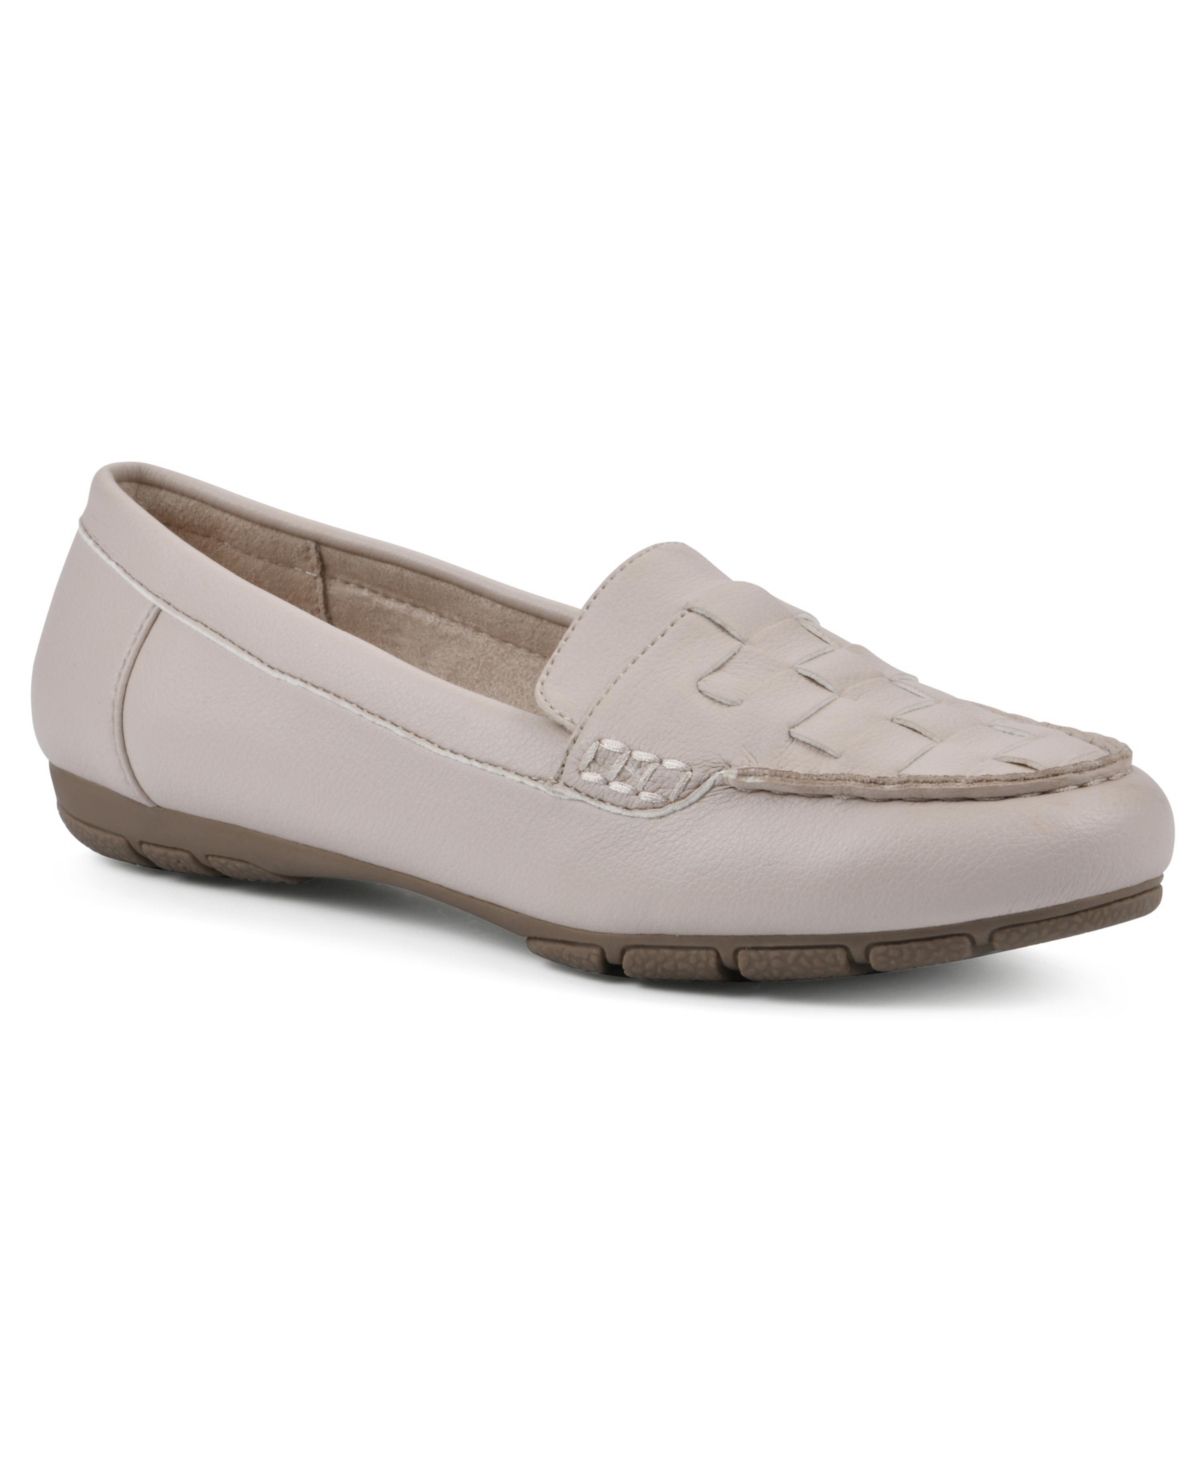 Women's Giver Moc Comfort Loafer - Taupe Tumbled Smooth